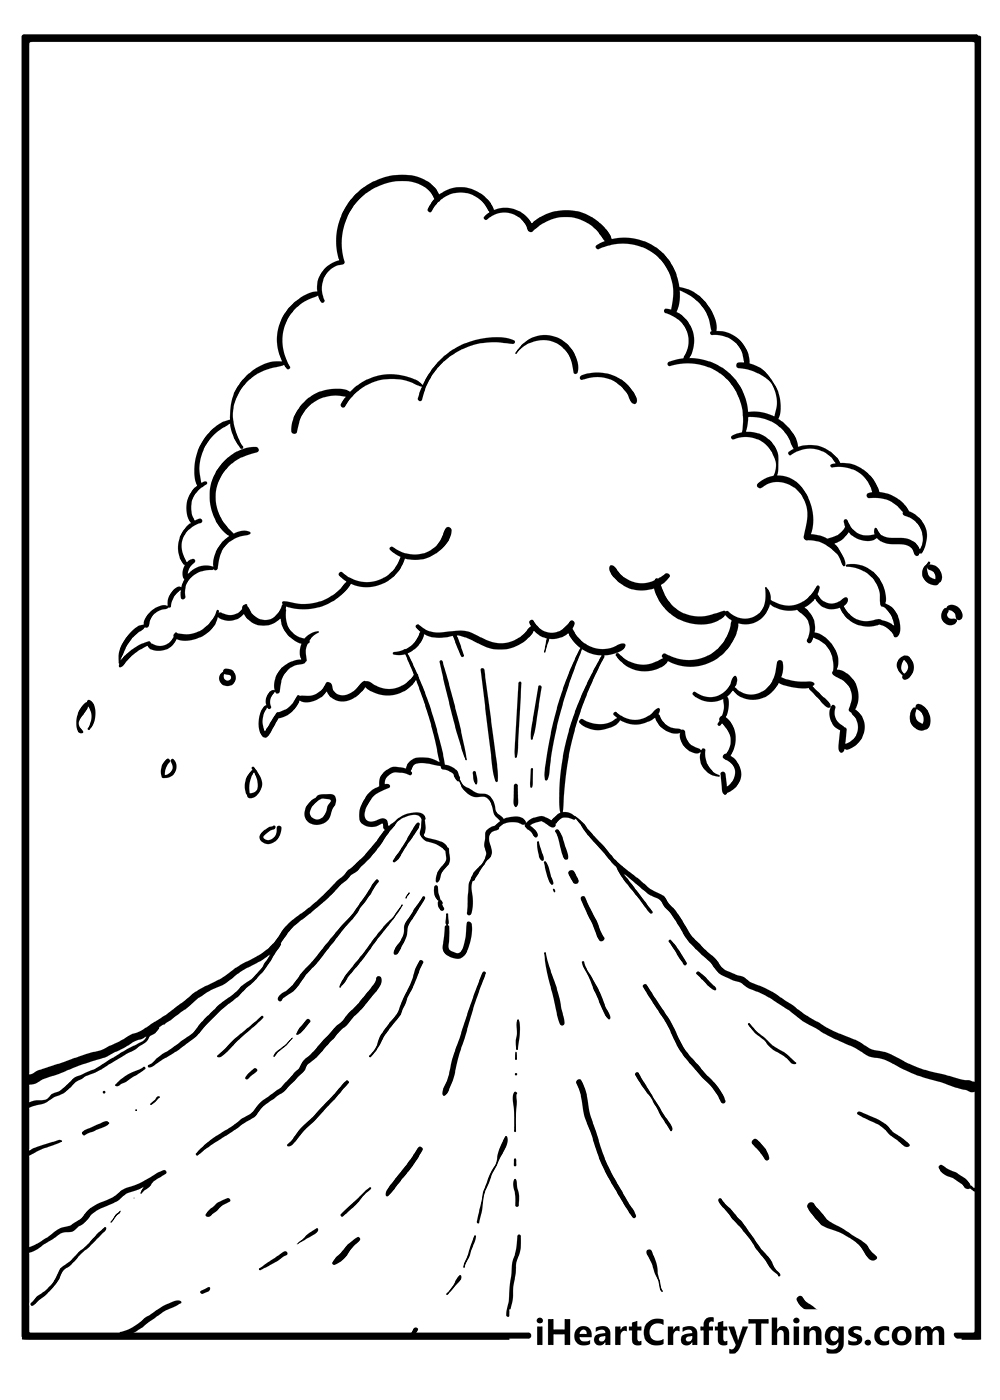 Printable Volcano Coloring Pages Updated 20